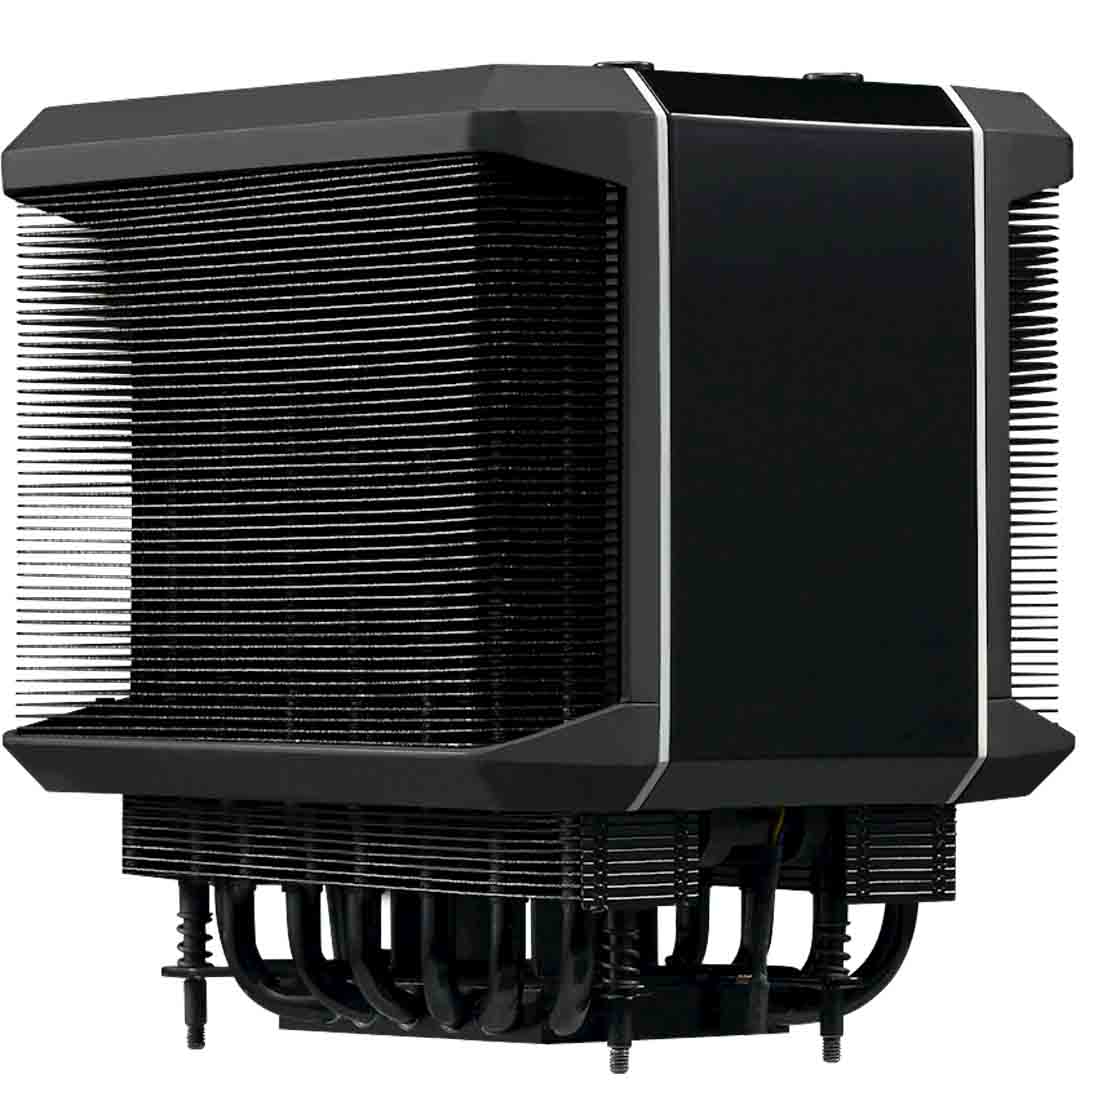 Cooler Master Wraith Ripper CPU Cooler with Dual Tower Heatsink Seven Heatpipes and Addressable RGB Lighting